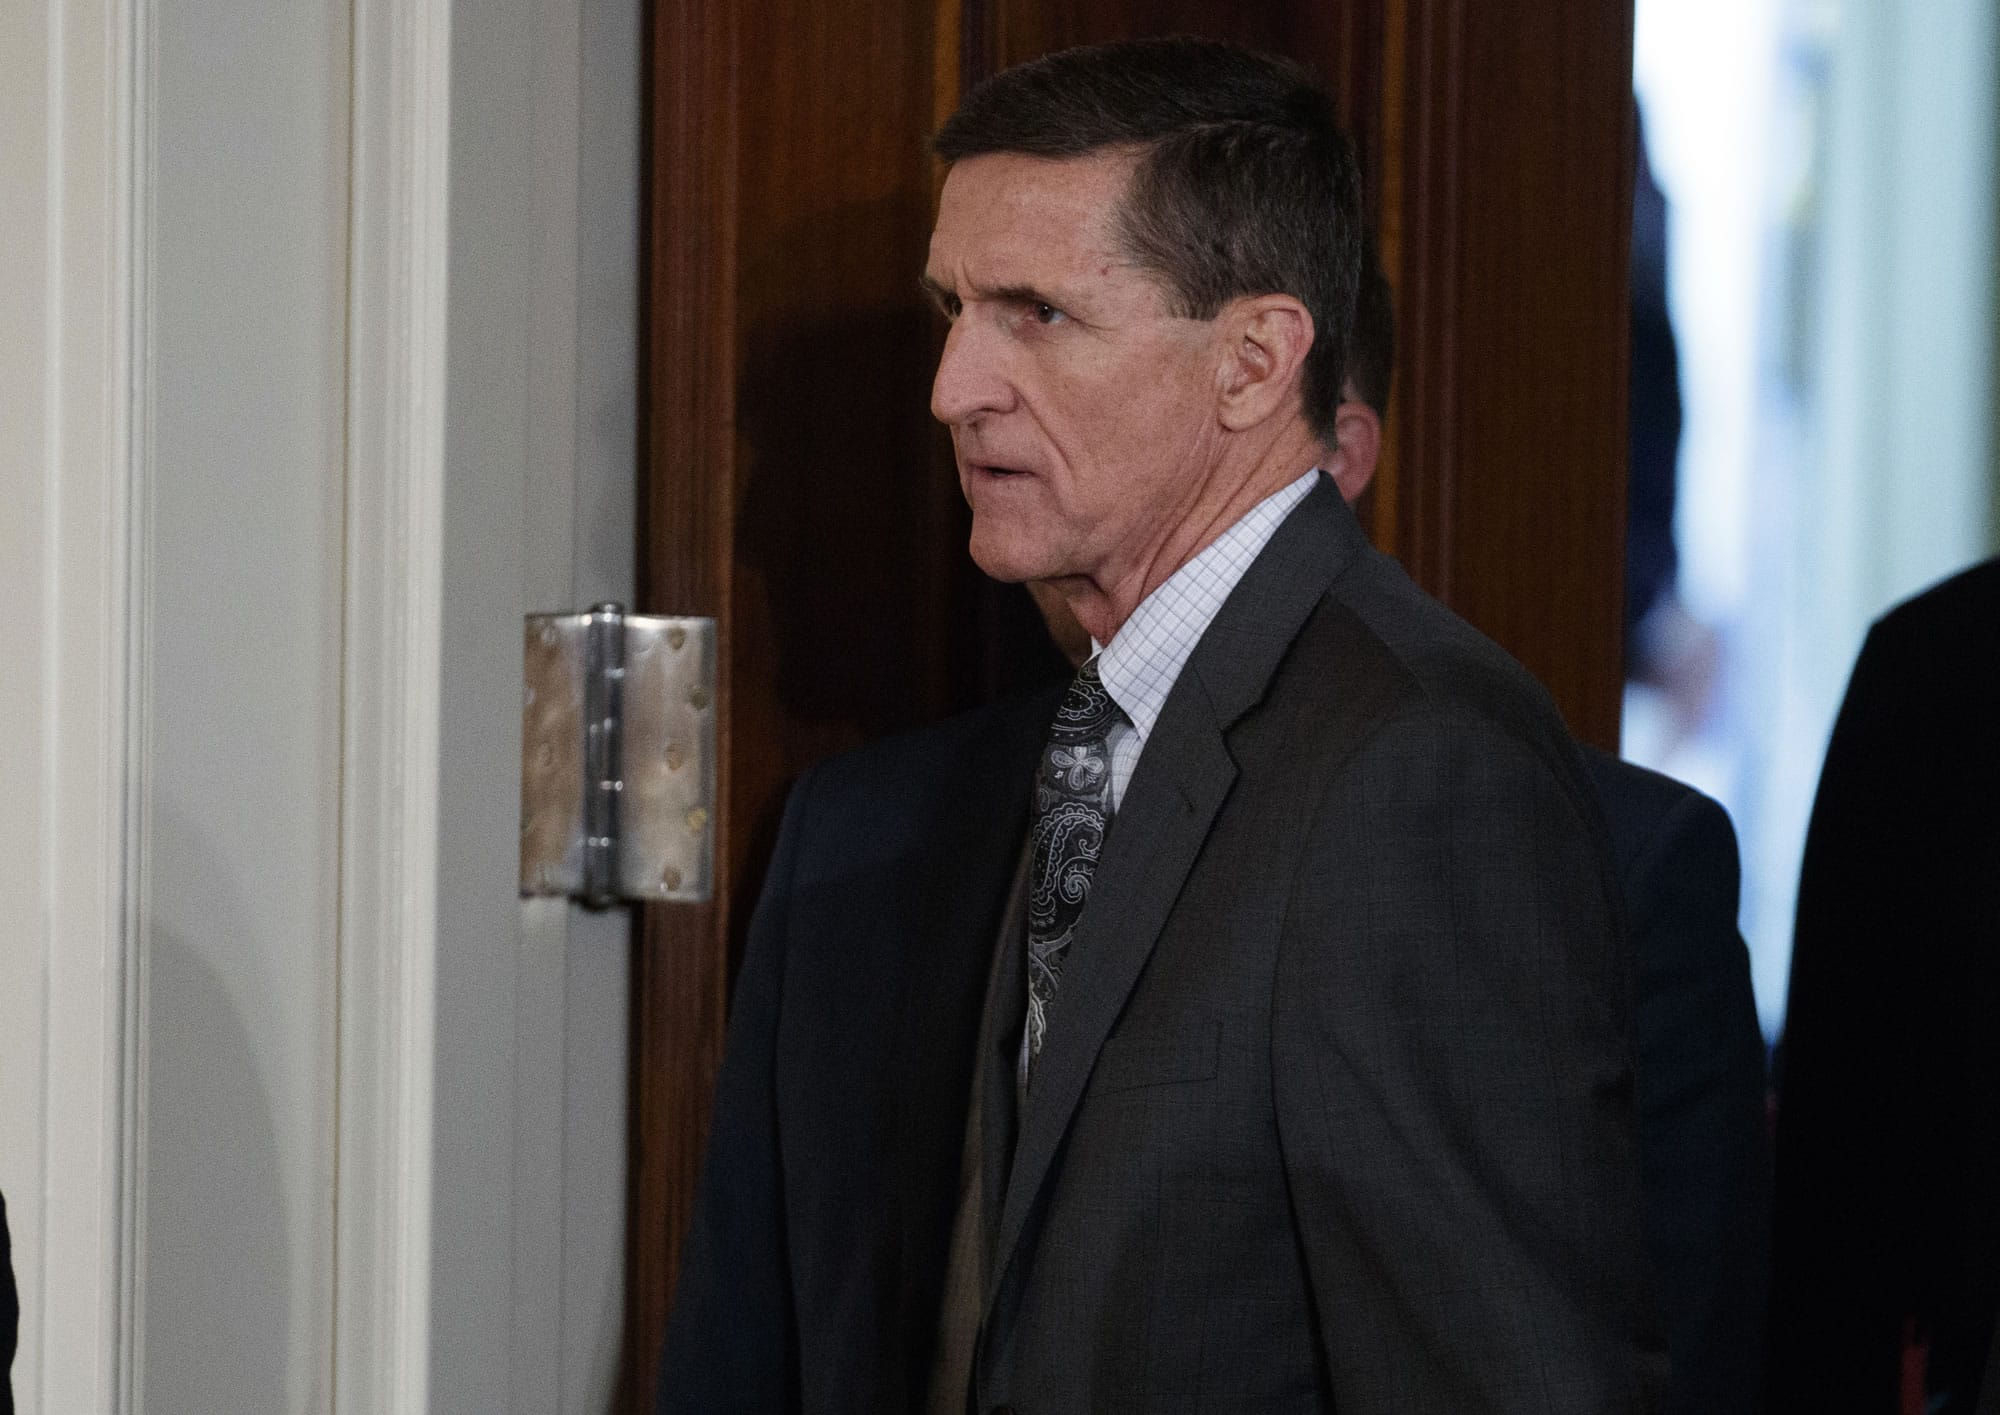 FILE - In this Feb. 13, 2017 file photo, Mike Flynn arrives for a news conference in the East Room of the White House in Washington. The former national security adviser will invoke his Fifth Amendment protection against self-incrimination on Monday, May 22, 2017, as he notifies the Senate Intelligence committee that he will not comply with a subpoena seeking documents.